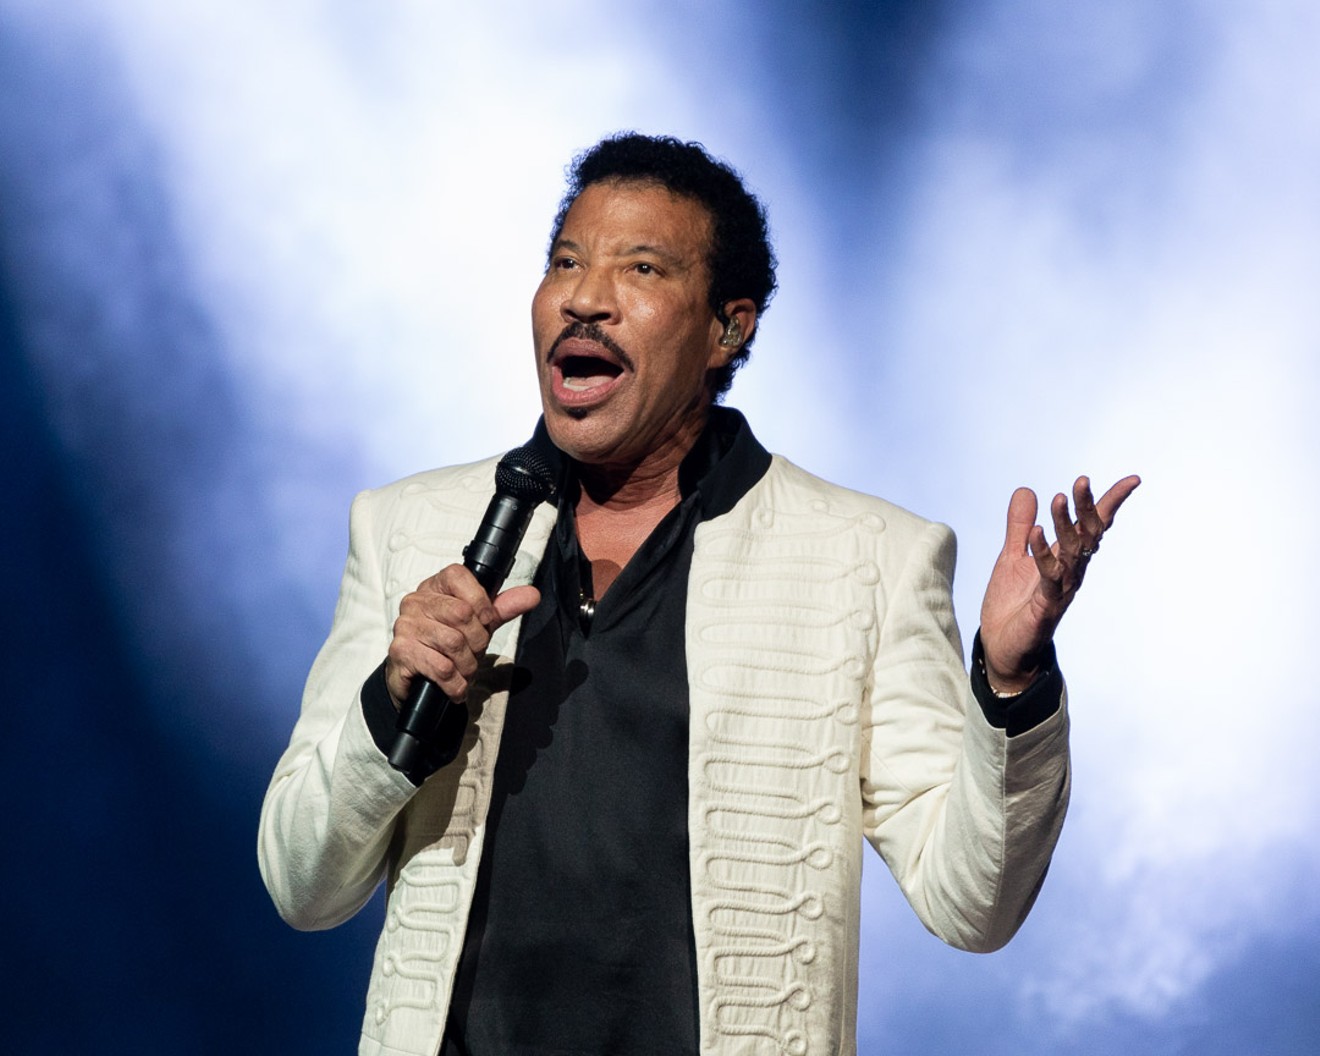 Singer-songwriter Lionel Richie performs his hits at Toyota Center.